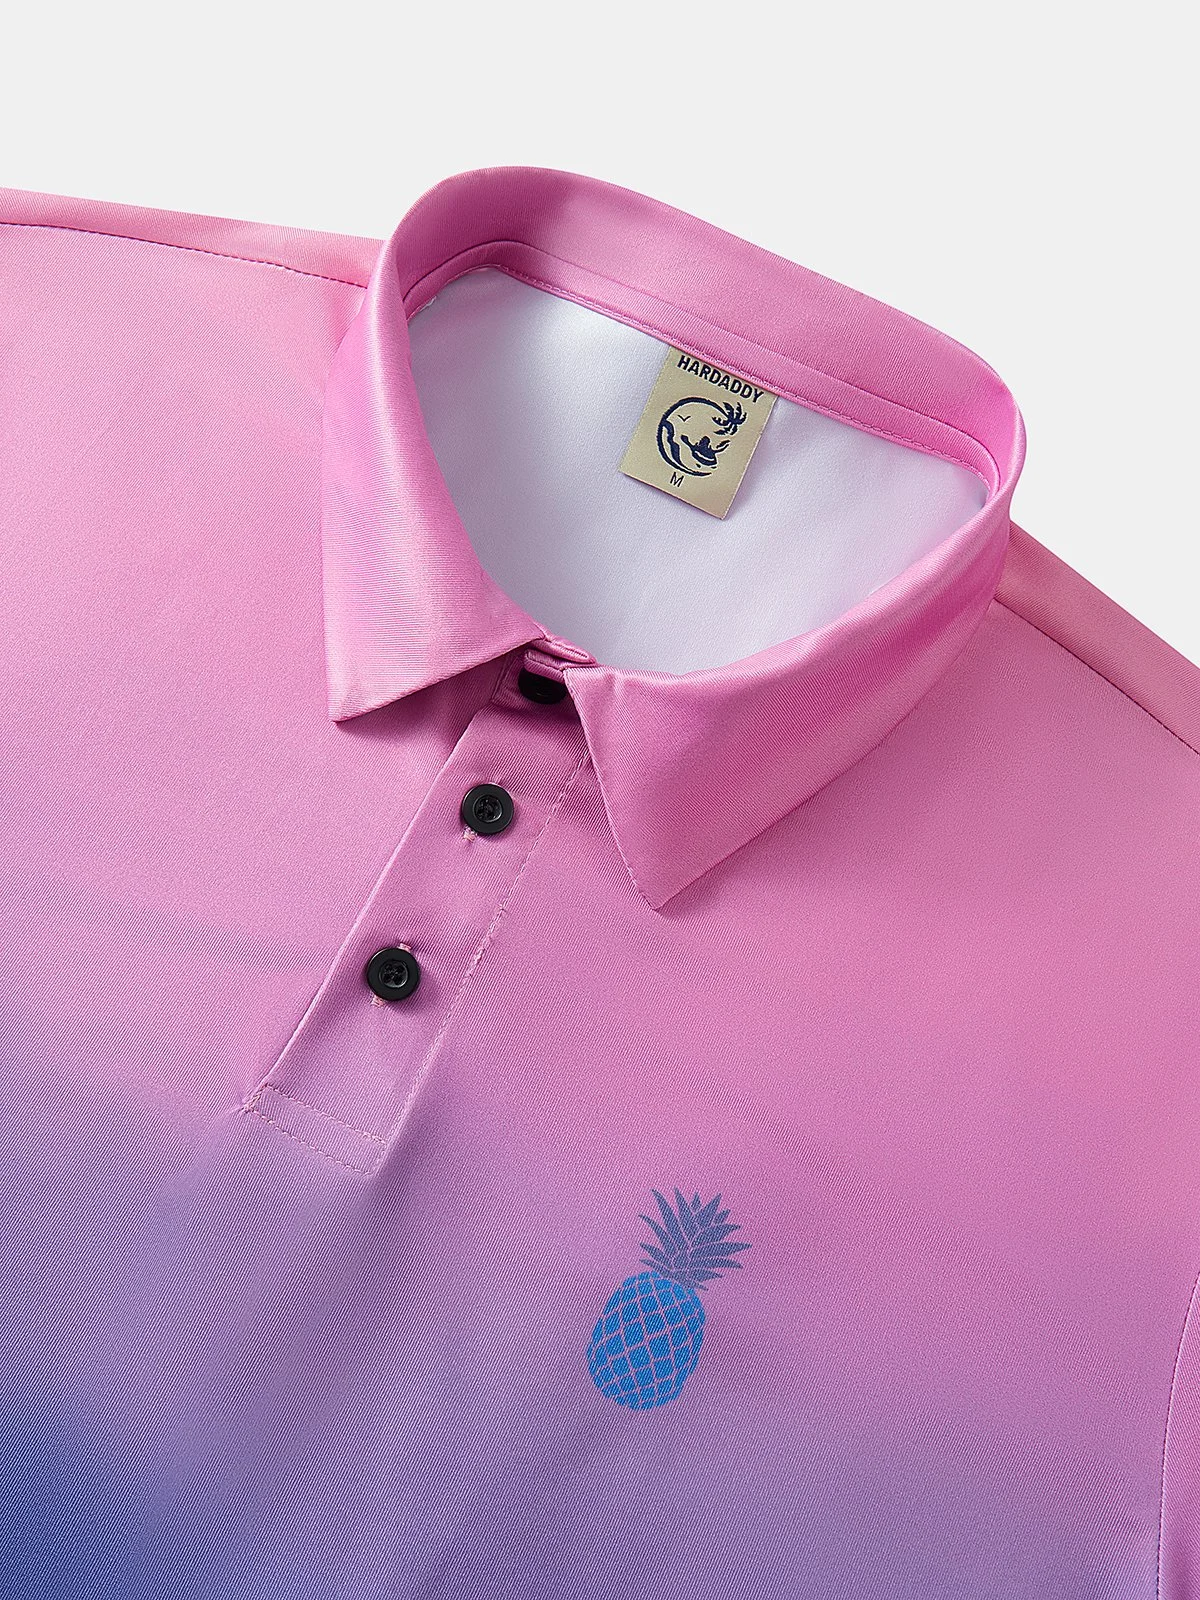 Hardaddy Moisture-wicking Ombre Pineapple Golf Polo Shirt